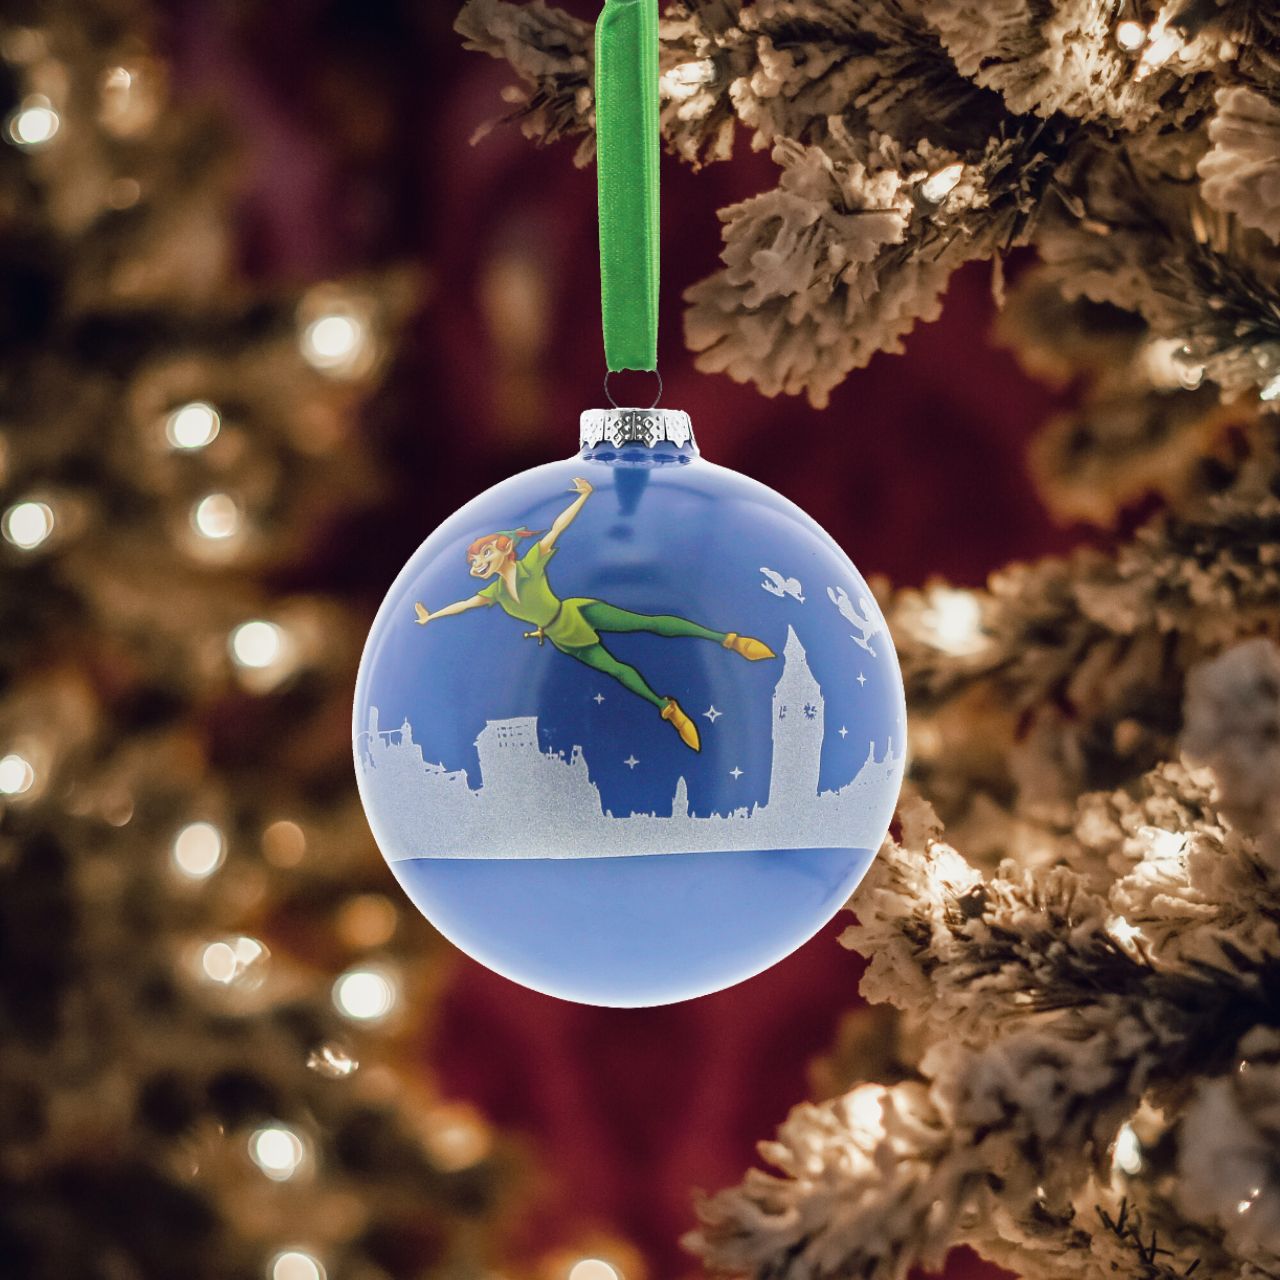 Disney Christmas Bauble Peter Pan You Can Fly  Peter Pan flys above the silhouette of London with Wendy and the boys in this beautiful glass bauble. This treasured keepsake would make a lovely unique gift for a friend, or a self-purchase to brighten up the home.